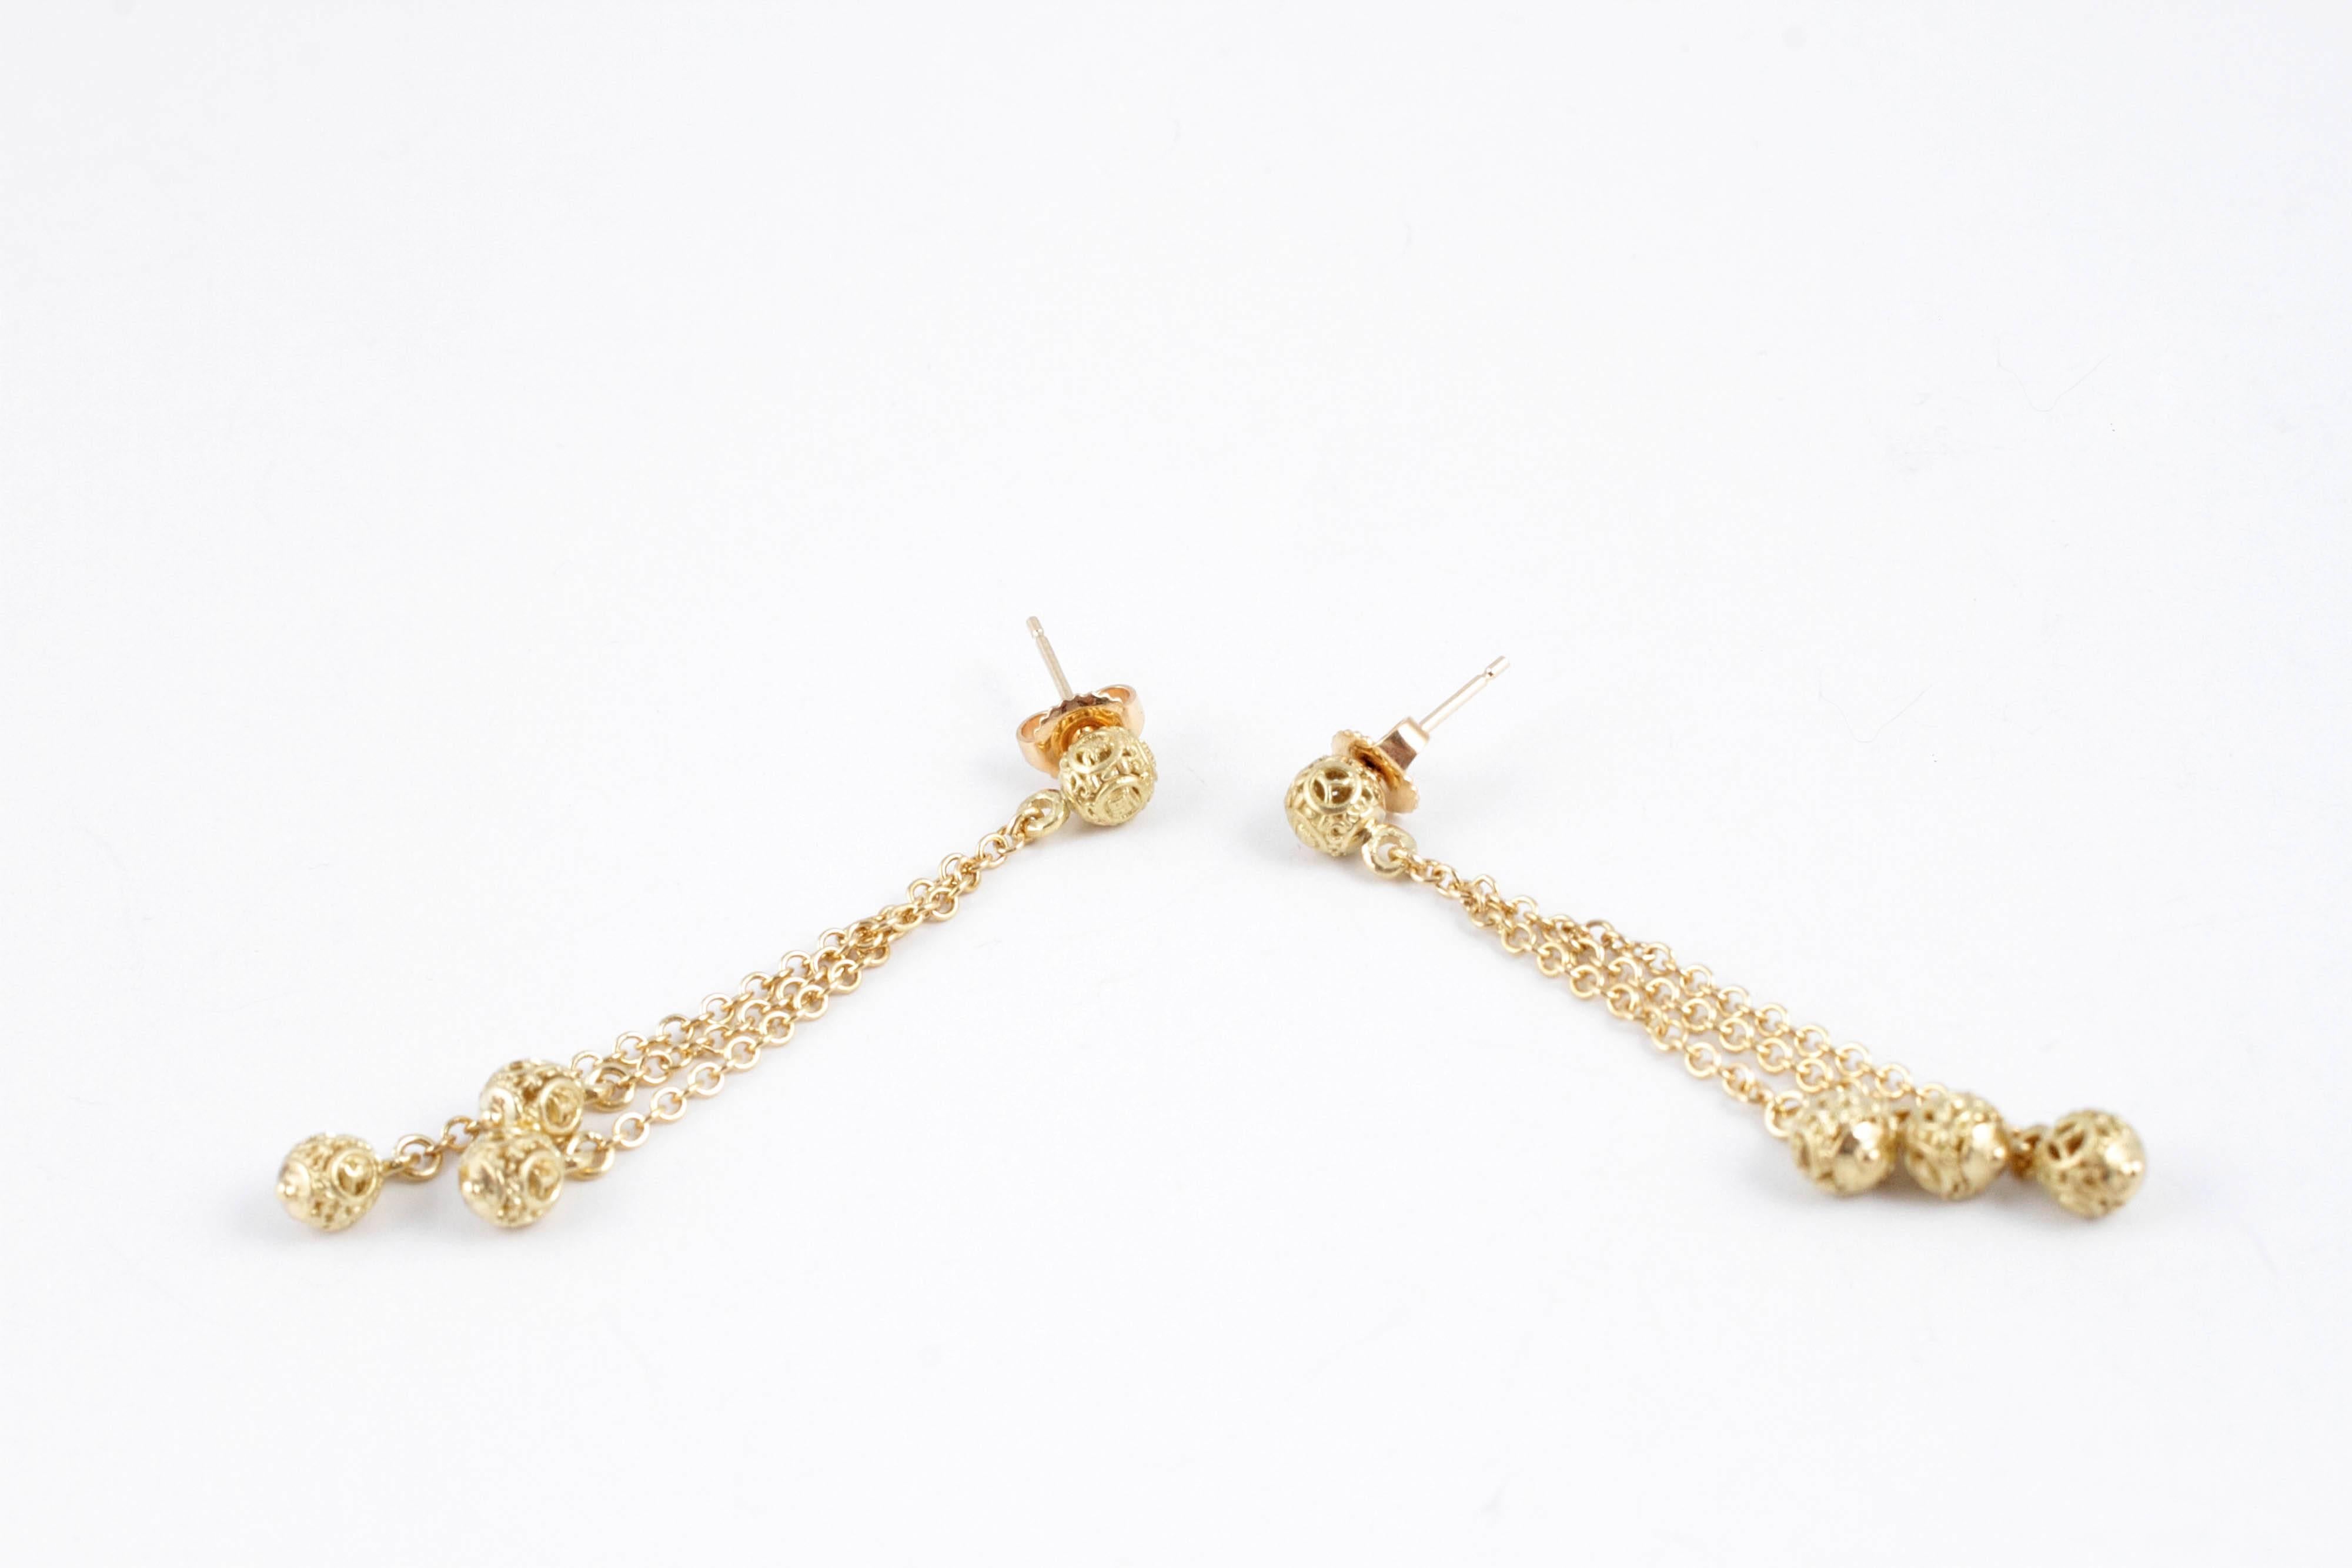 Swinging and Fun! In 14 karat, textured yellow gold, almost 2